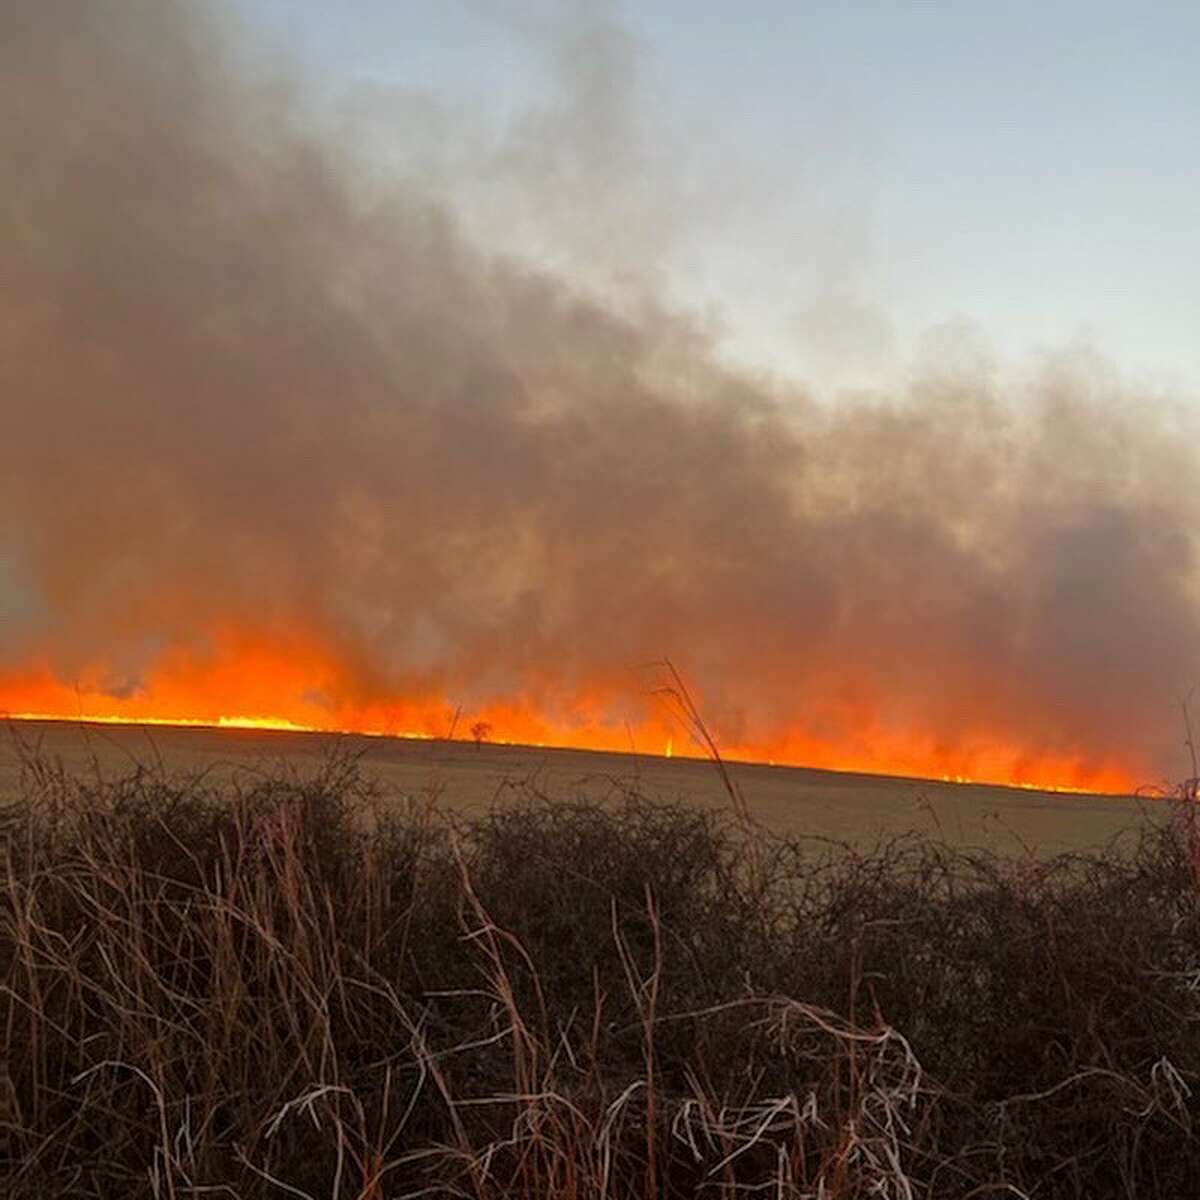 Fire Departments across the Houston and Texas region have been called to help battle the outbreak of wildfires in west Texas. 